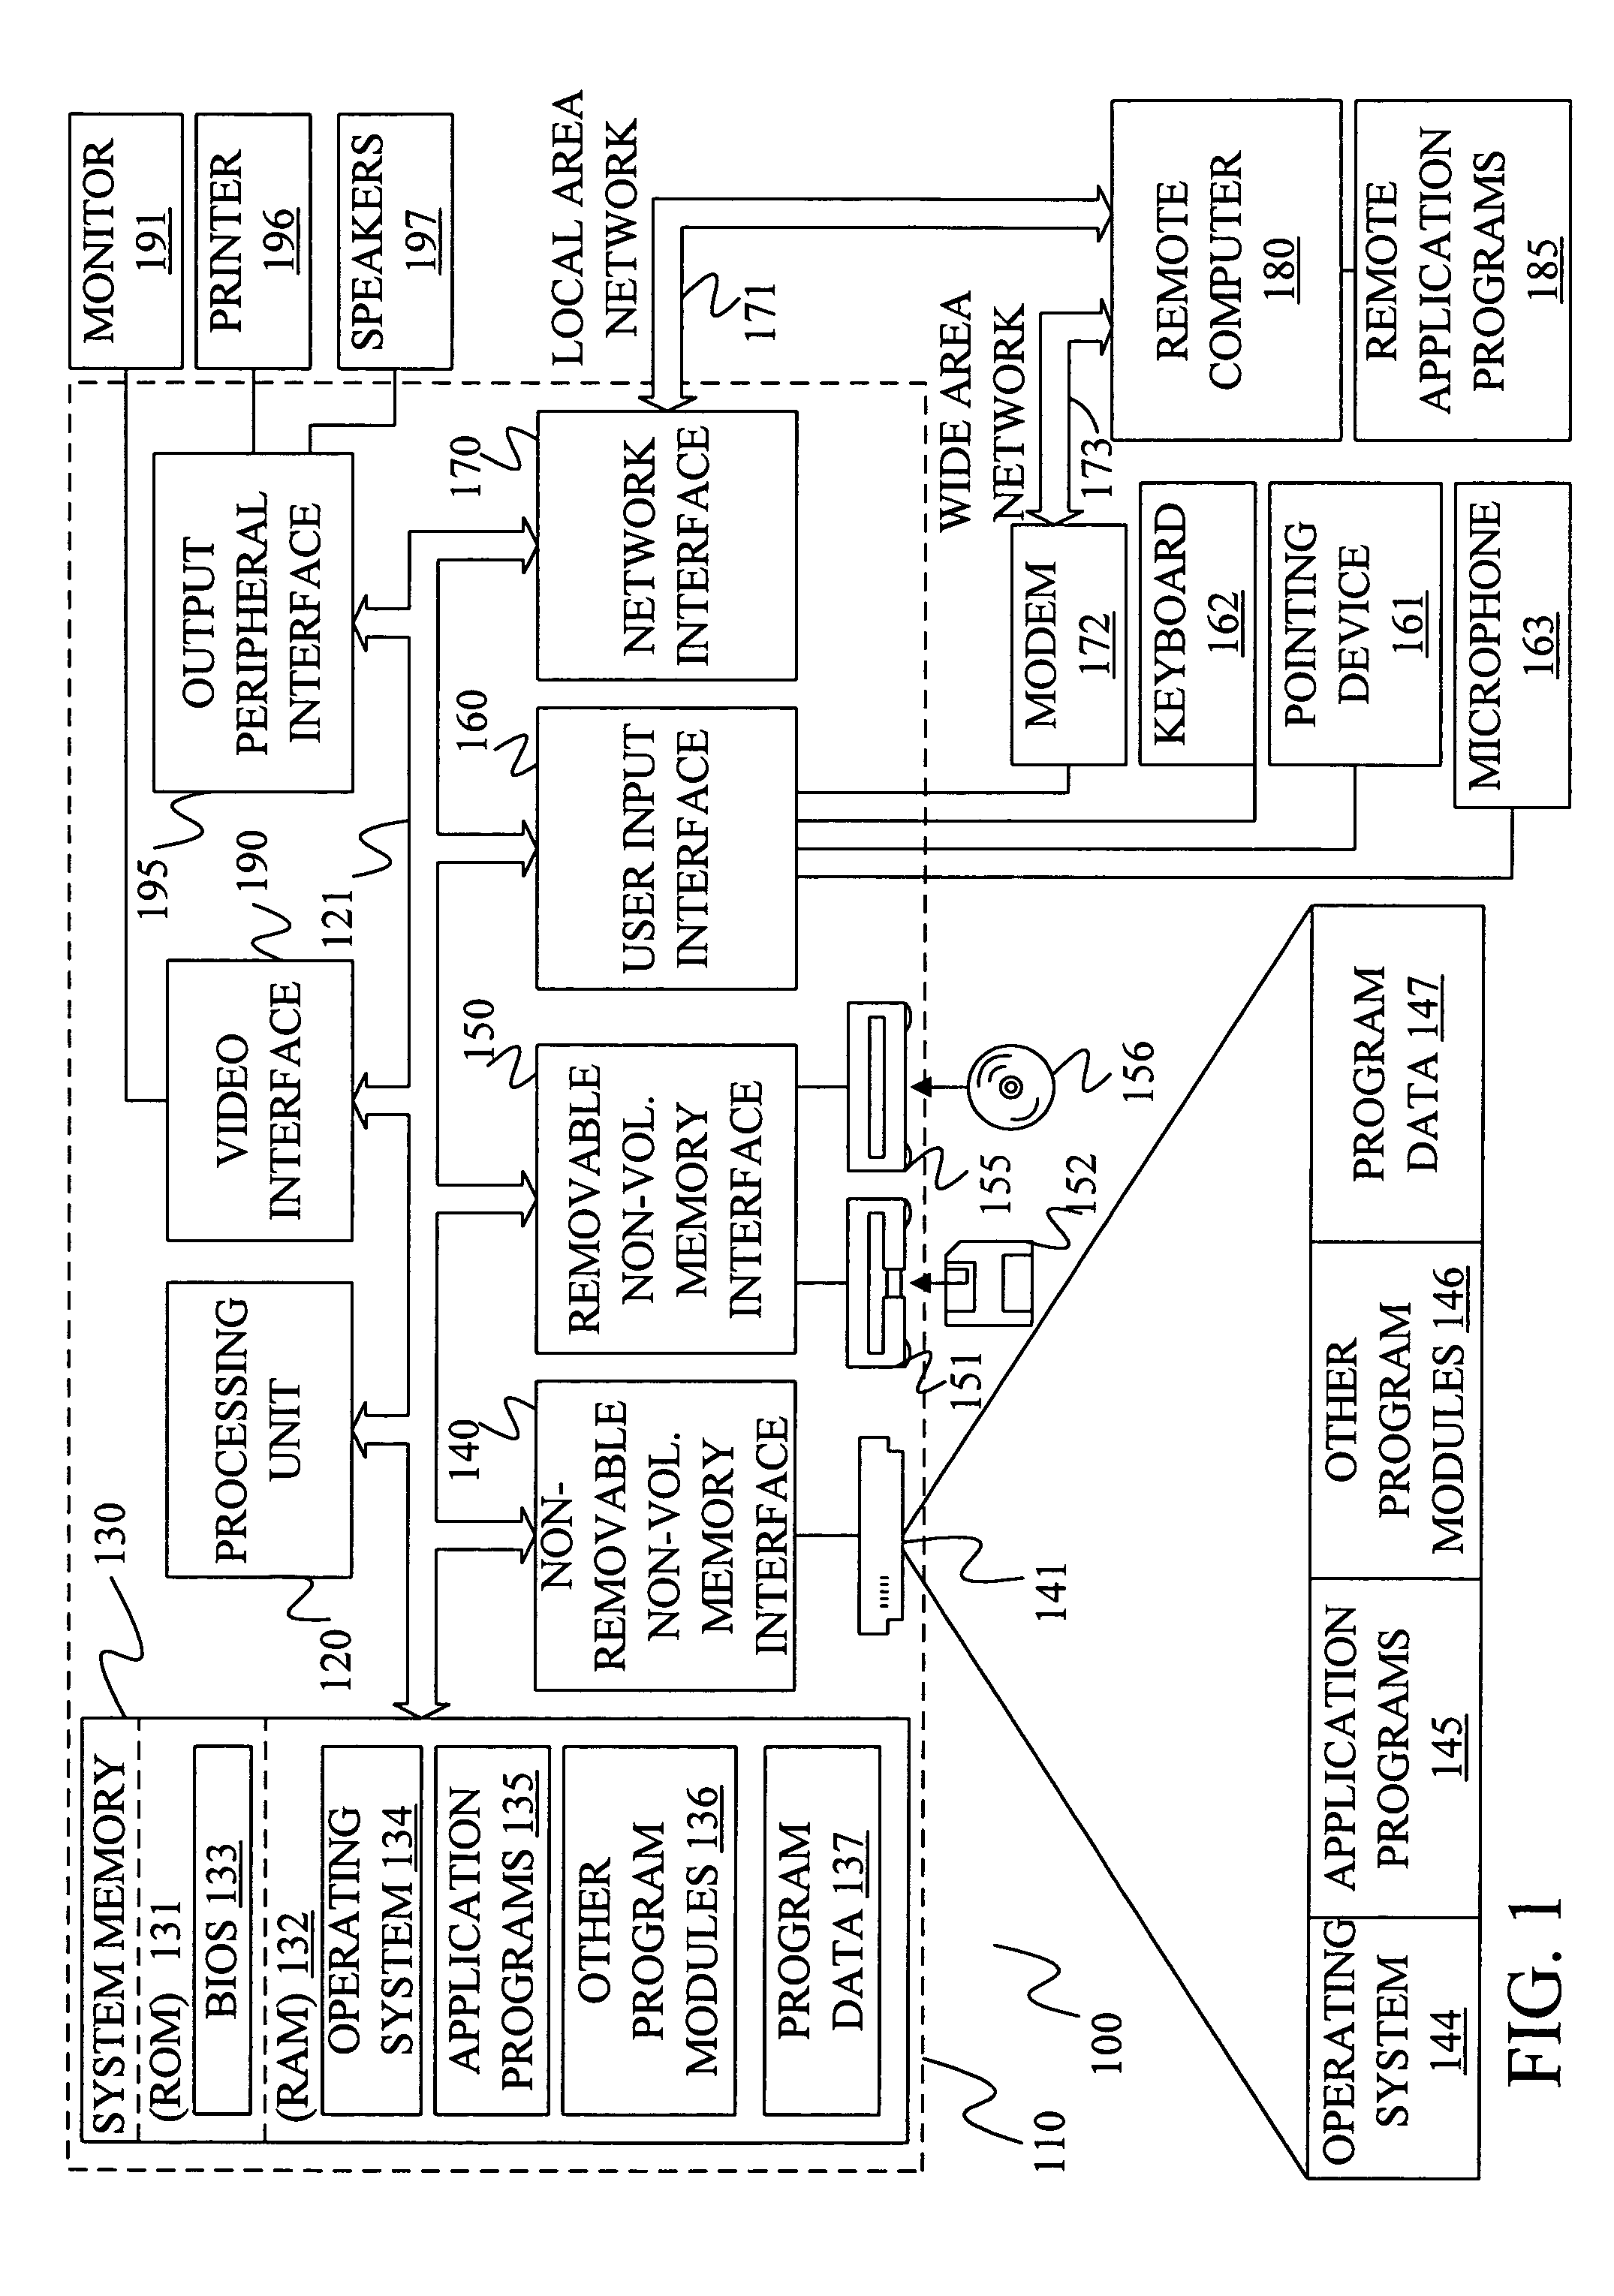 Method of speech recognition using variational inference with switching state space models